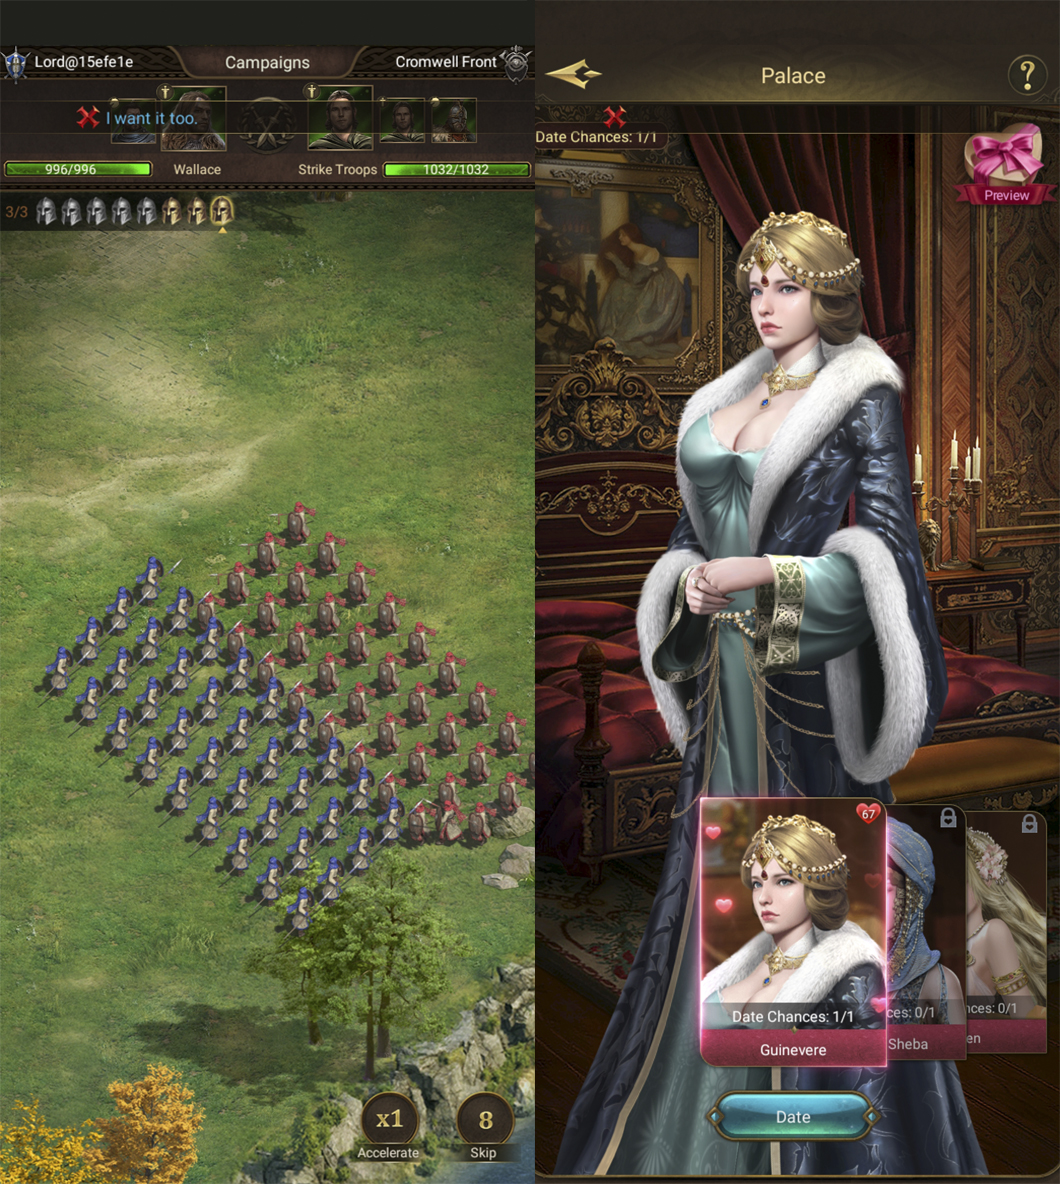 Empire: Rising Civilizations: two screenshots showing an army on the left and Guinevere at the Palace dressed in blue on the right.